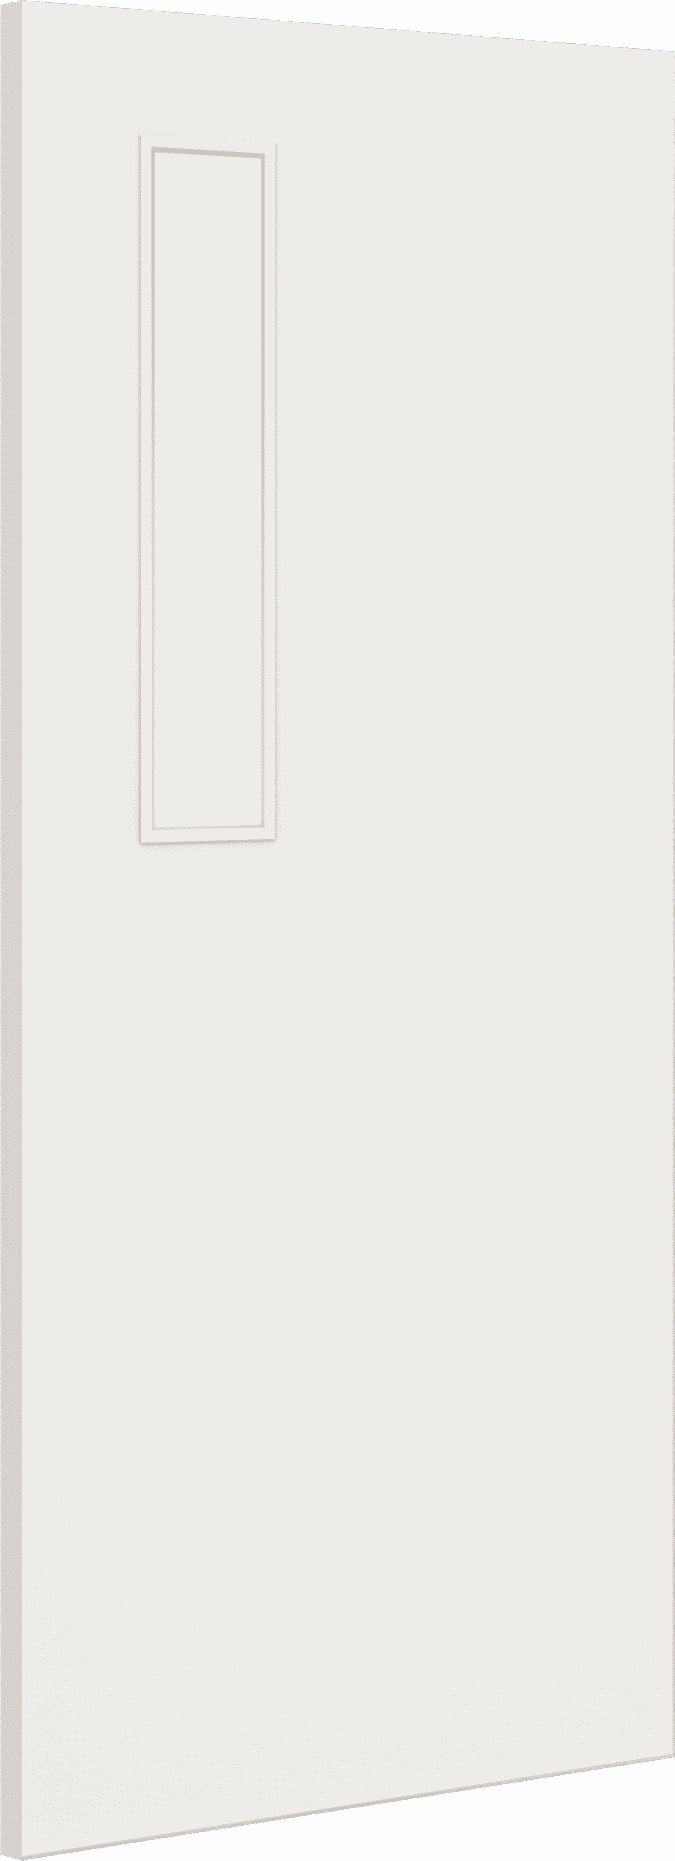 1981mm x 838mm x 44mm (33") Architectural Paint Grade White 08 Frosted Glazed Fire Door Blank